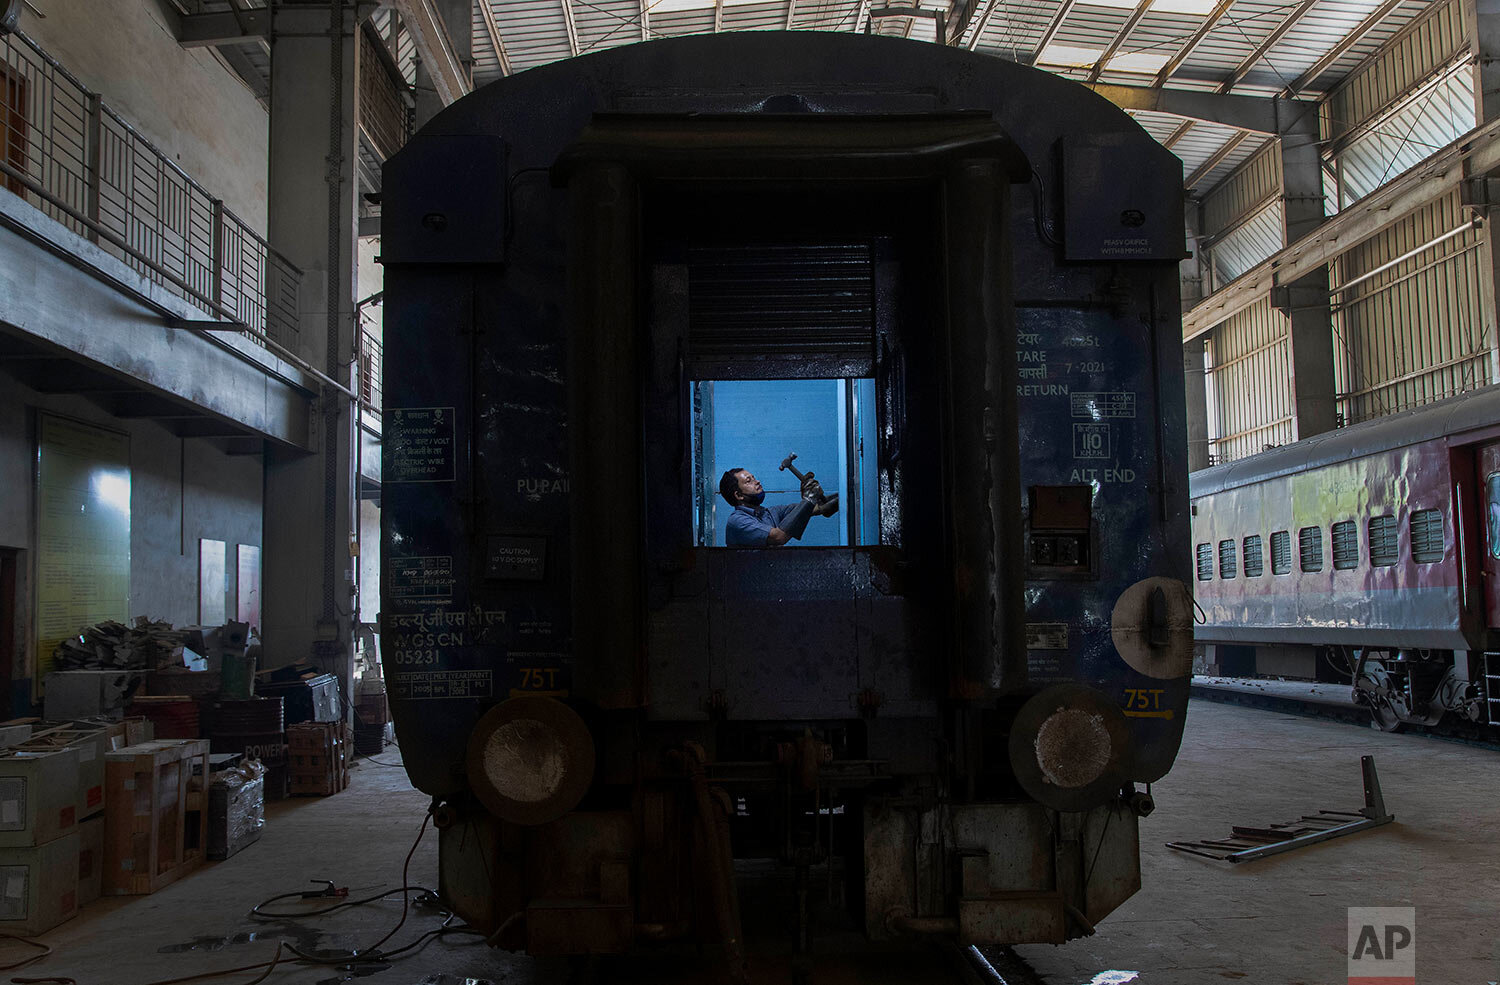  An Indian railway employee works to convert a train coach into an isolation ward for the fight against the new coronavirus in Gauhati, India, Sunday, March 29, 2020. (AP Photo/Anupam Nath) 